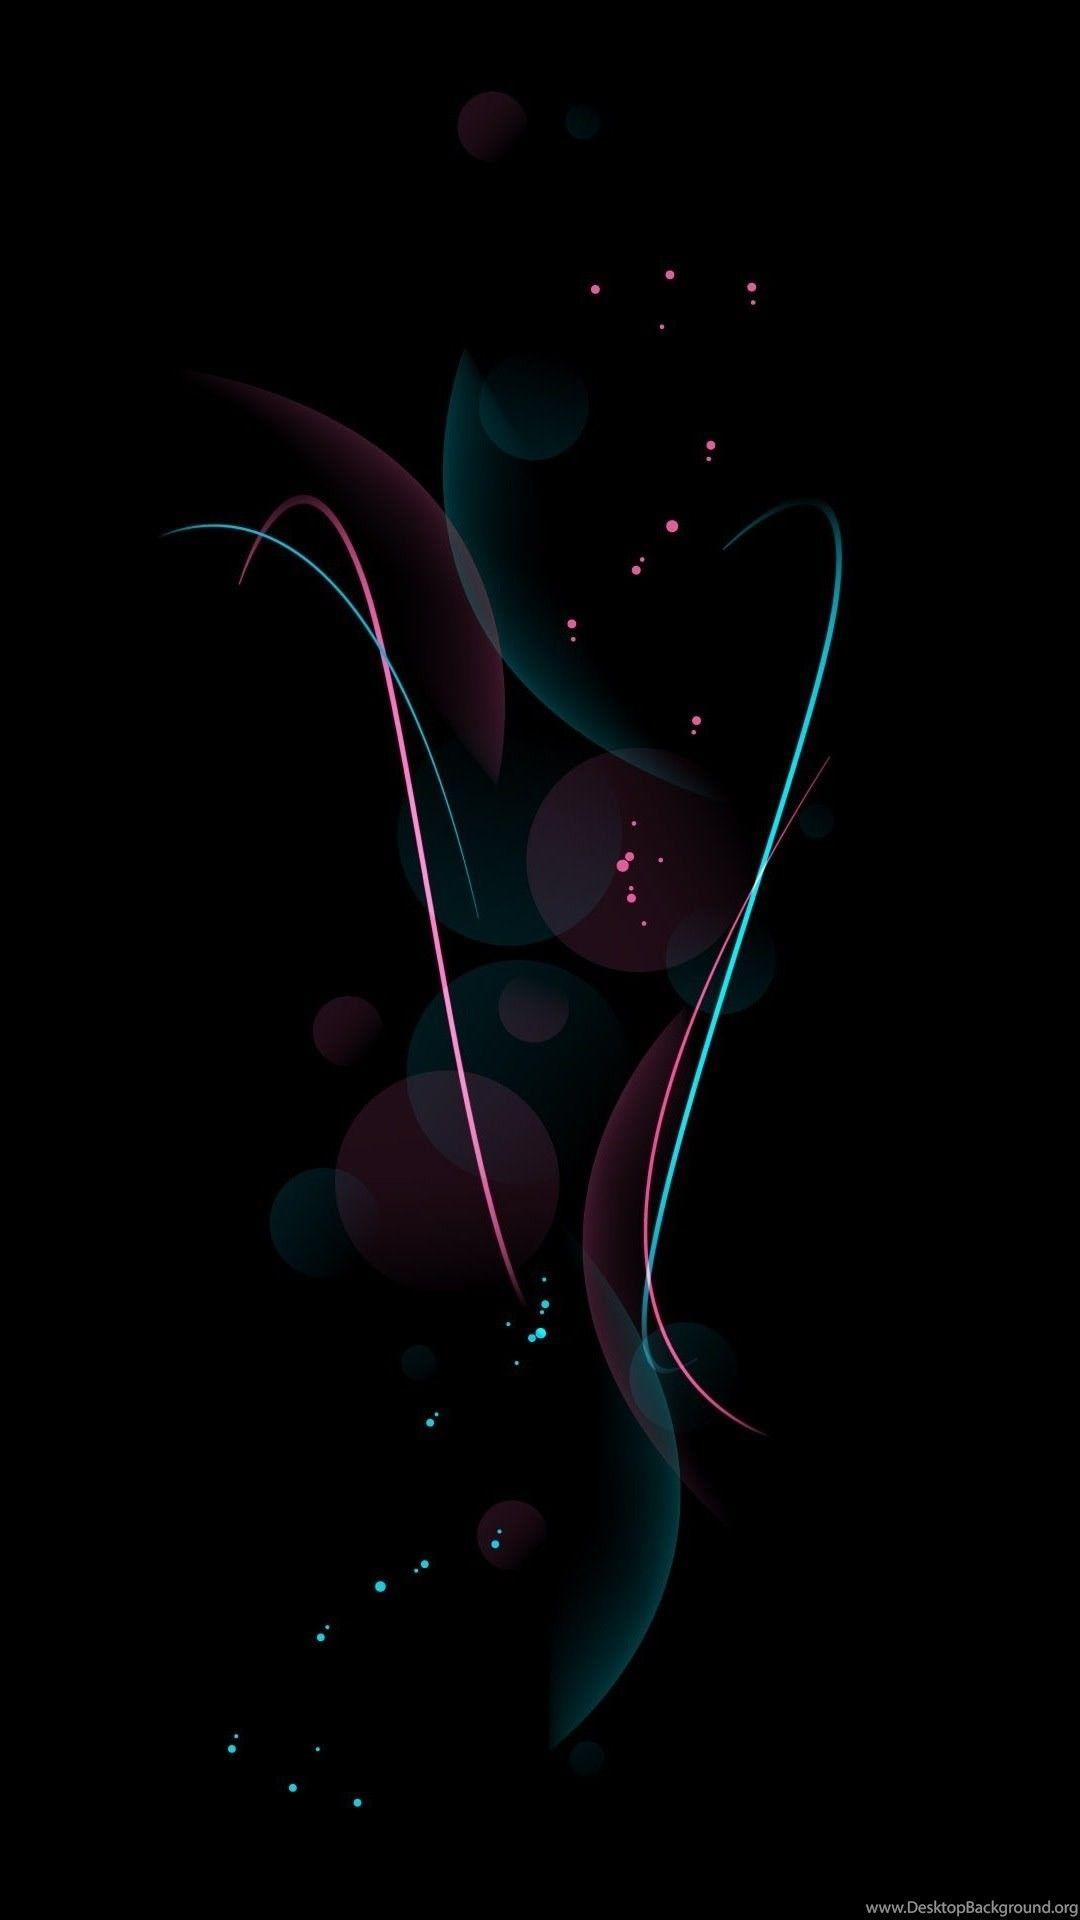 Dark Android Wallpaper Free Dark Android Background